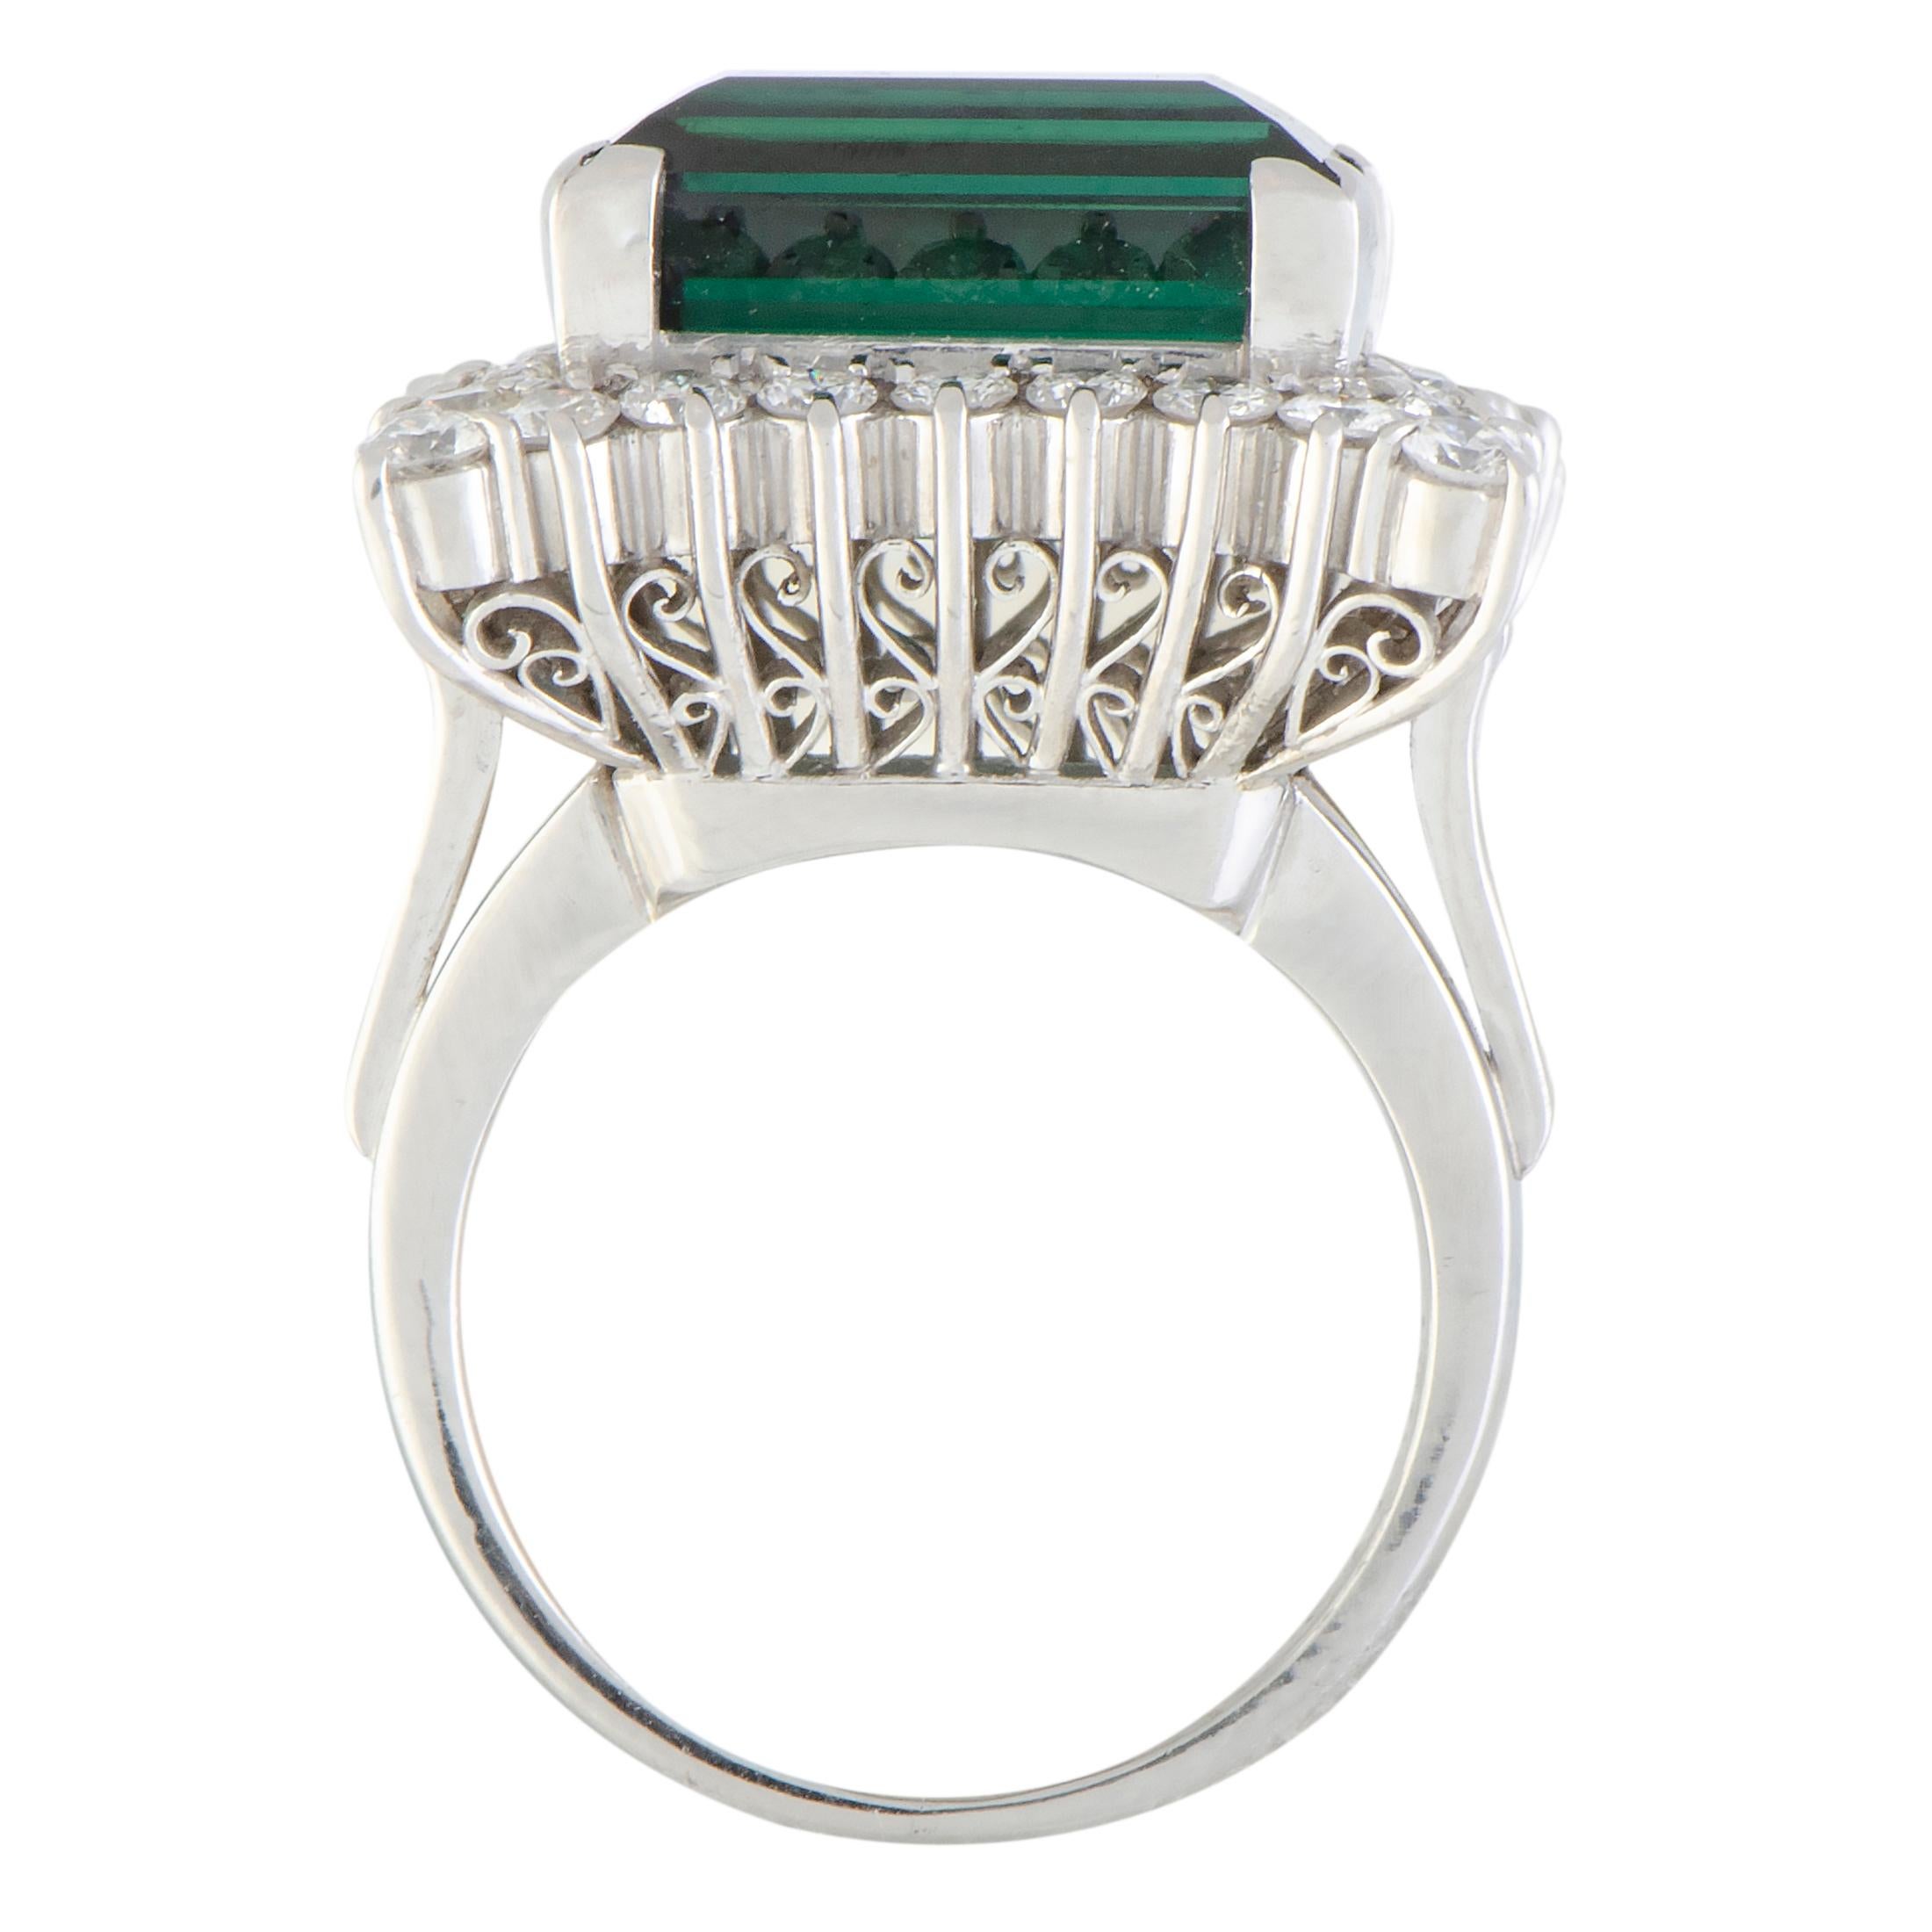 Add a sophisticated touch of regal prestige to your ensembles with this wonderful ring that boasts an exceptionally elegant design and stunningly luxurious décor. The ring is made of platinum and set with an eye-catching green tourmaline that weighs